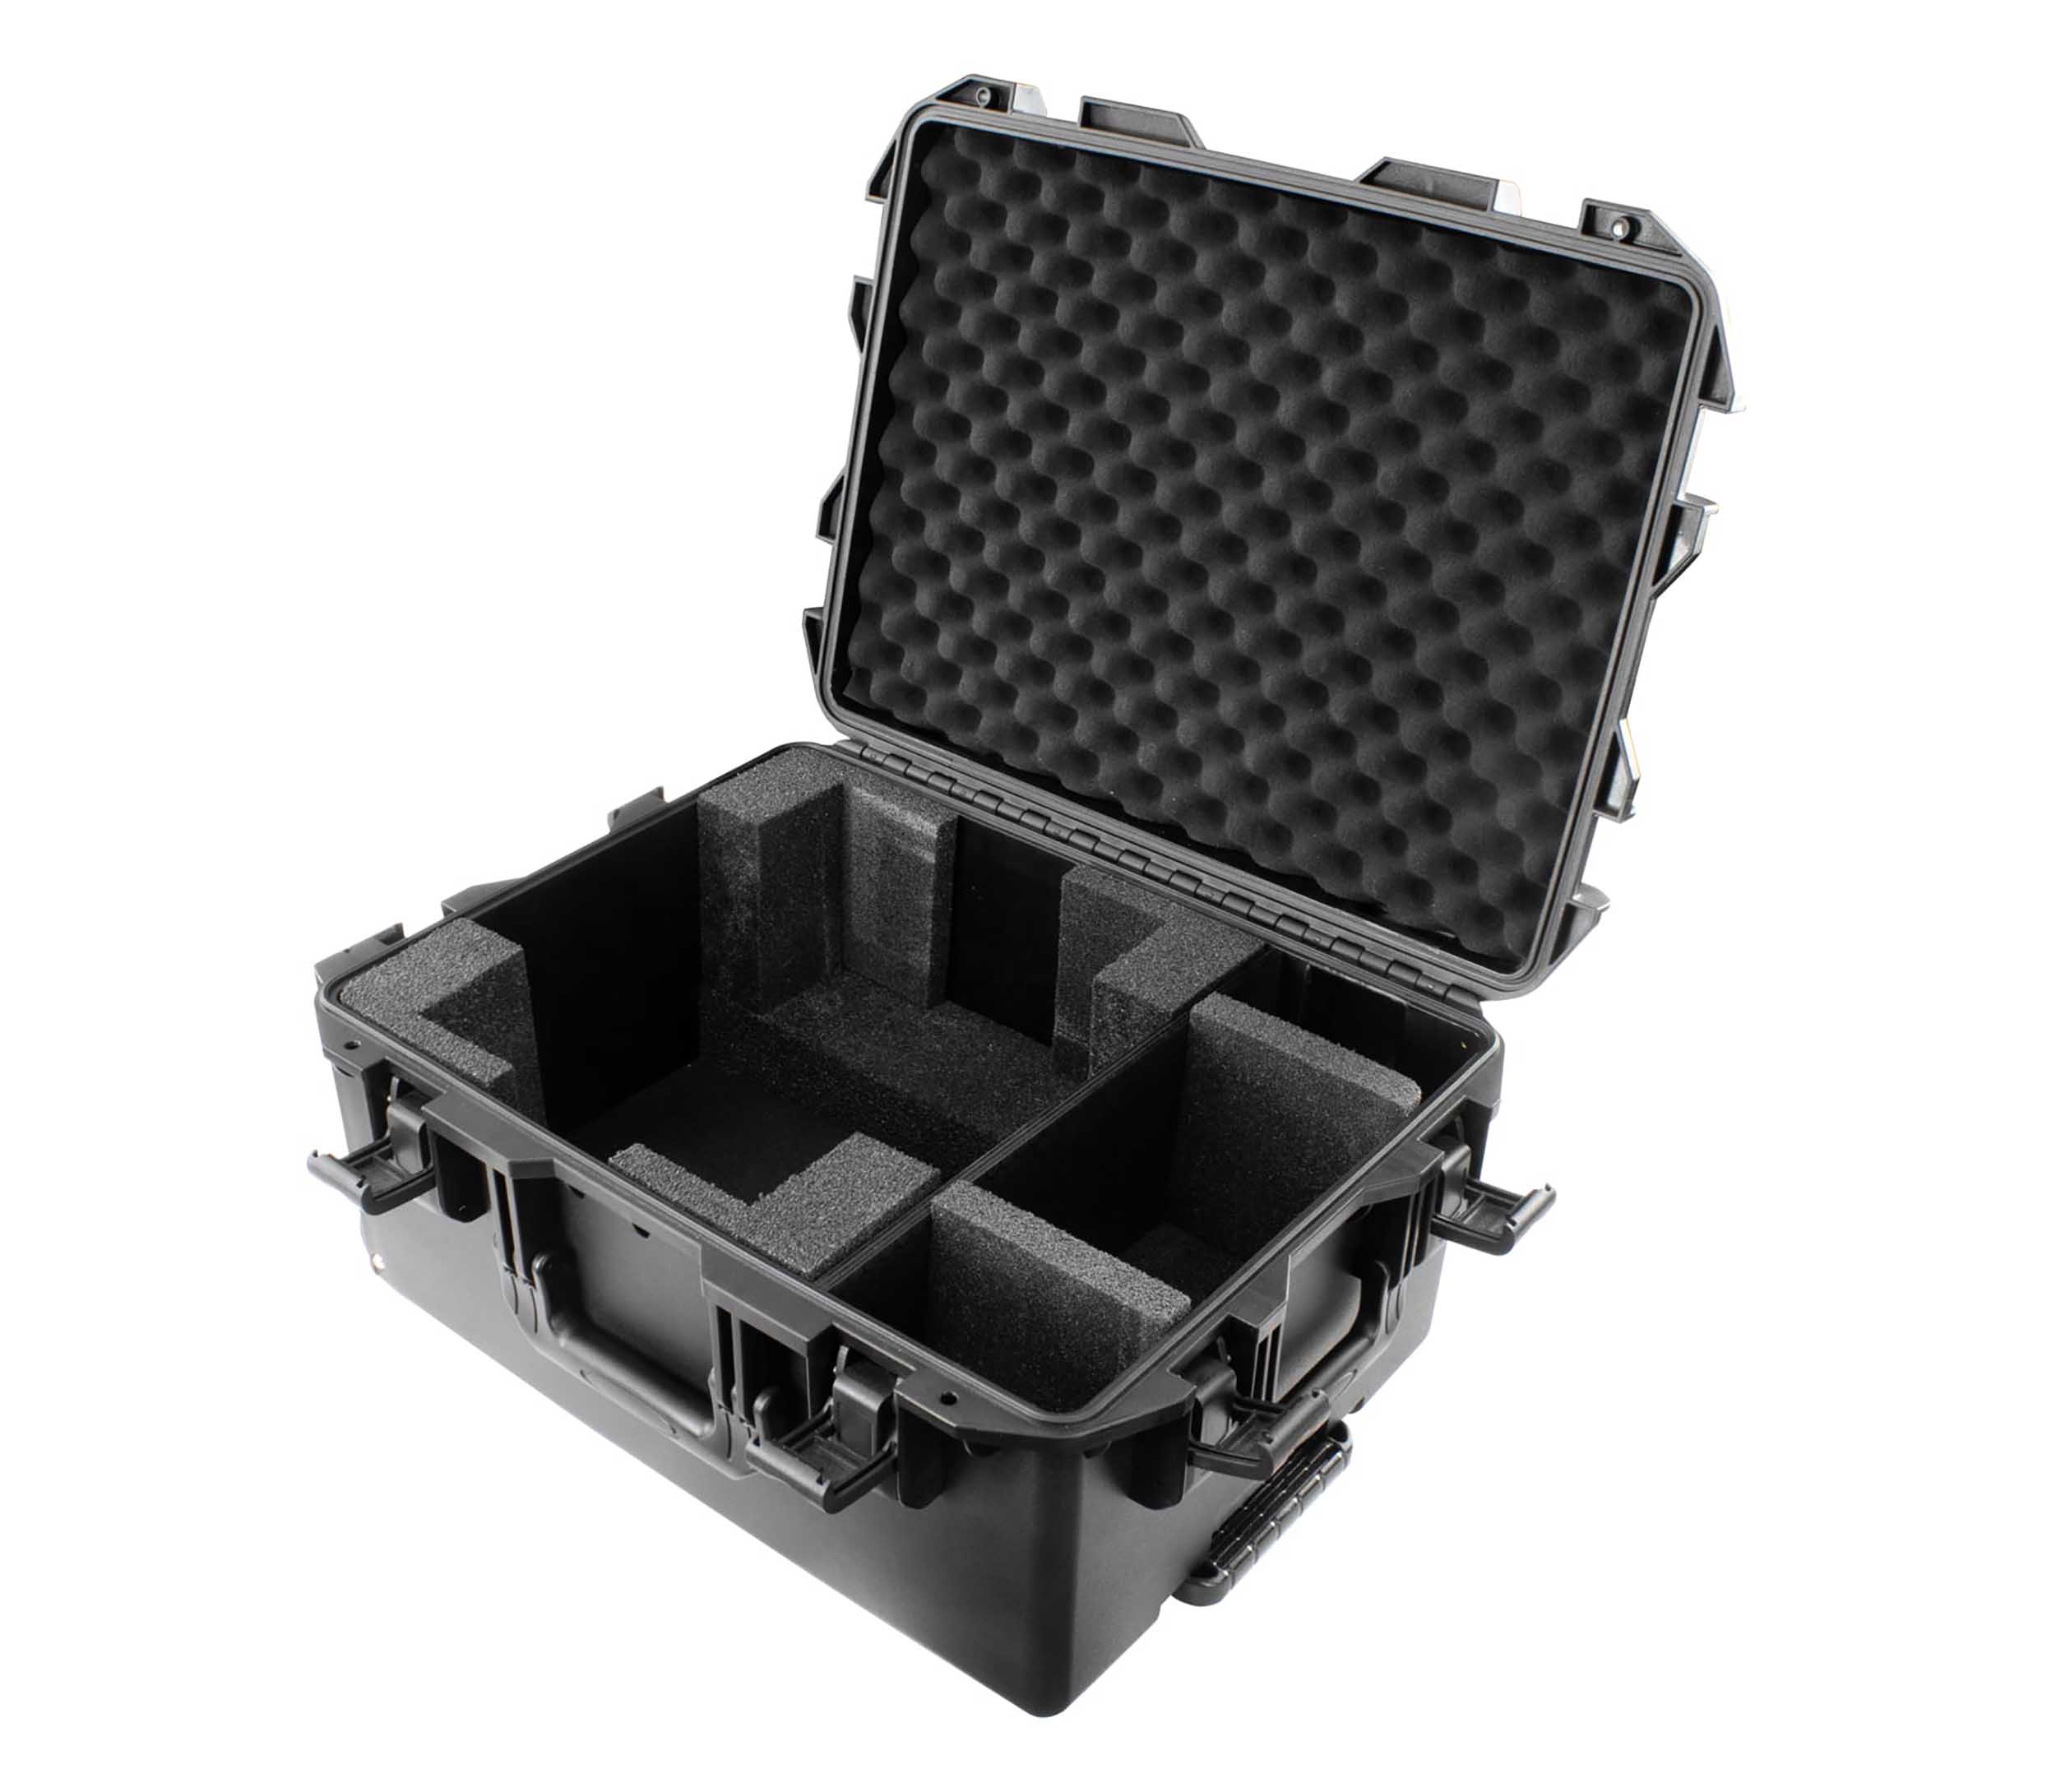 Odyssey Deluxe DNP Dustproof and Watertight Trolley Case for DS620 Printer and Accessories by Odyssey